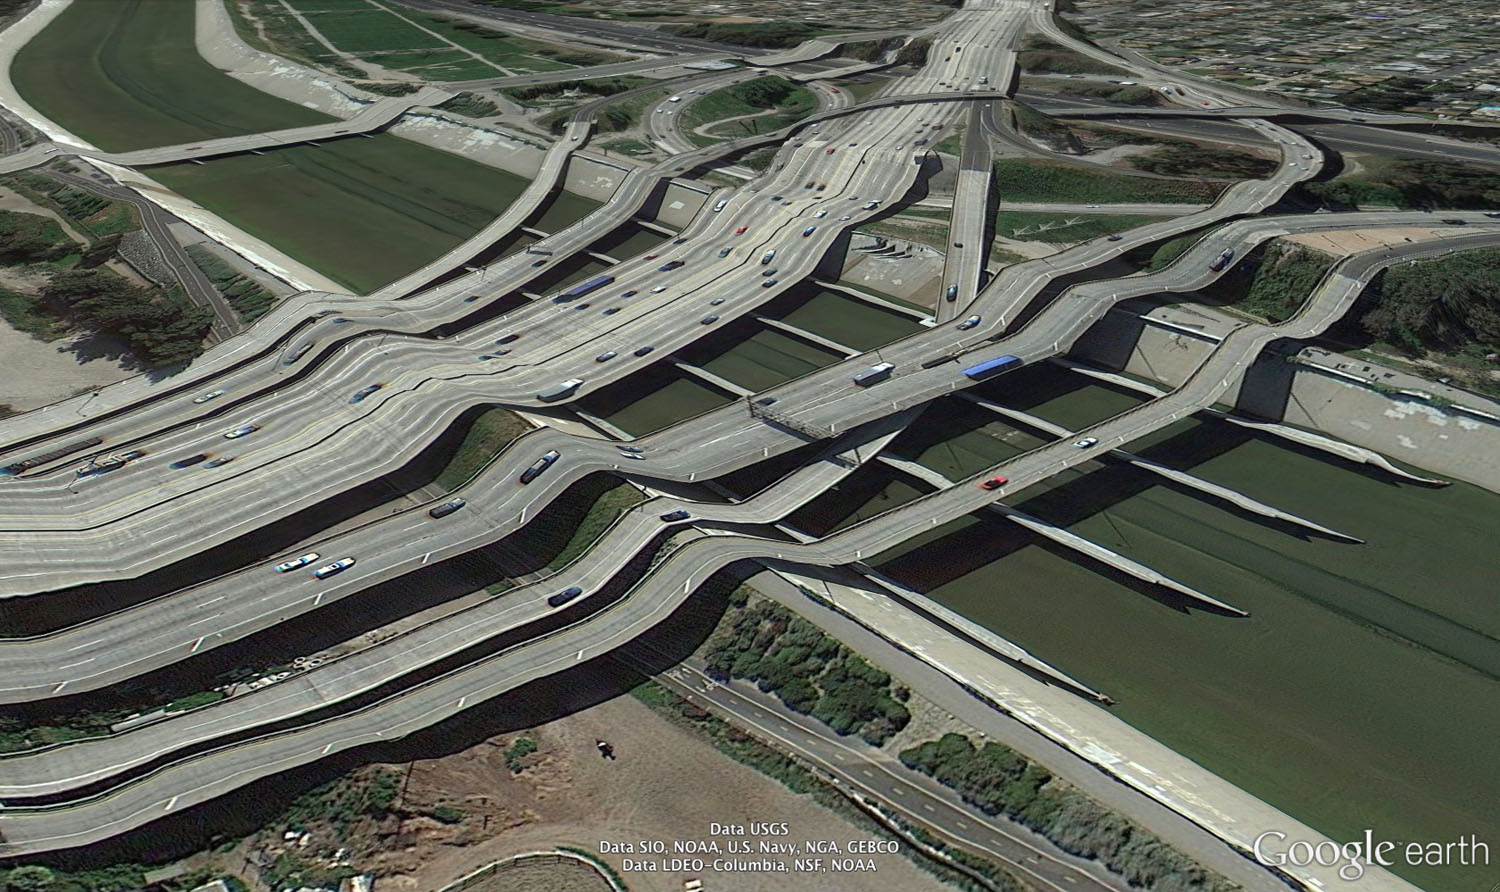 Postcards from Google Earth, by Clement Valla
                              Untitled
                               
                               I started focusing on these typologies — this peculiar condition that tends to occur around specific types of structures like, bridges, overpasses and bodies of water. Basically what happens is that Google gets a 3D model of the earth’s surface and then they take the aerial photography and just project it straight down onto the 3D model. Essentially these aerial photographs are being bent and stretched and distorted to fit the 3D surface of the earth.
                              
                              What I’m concerned about most with all of my work is the interplay between human elements and computer elements and how these impersonal systems or impersonal processes are producing this type of crazy new imagery.